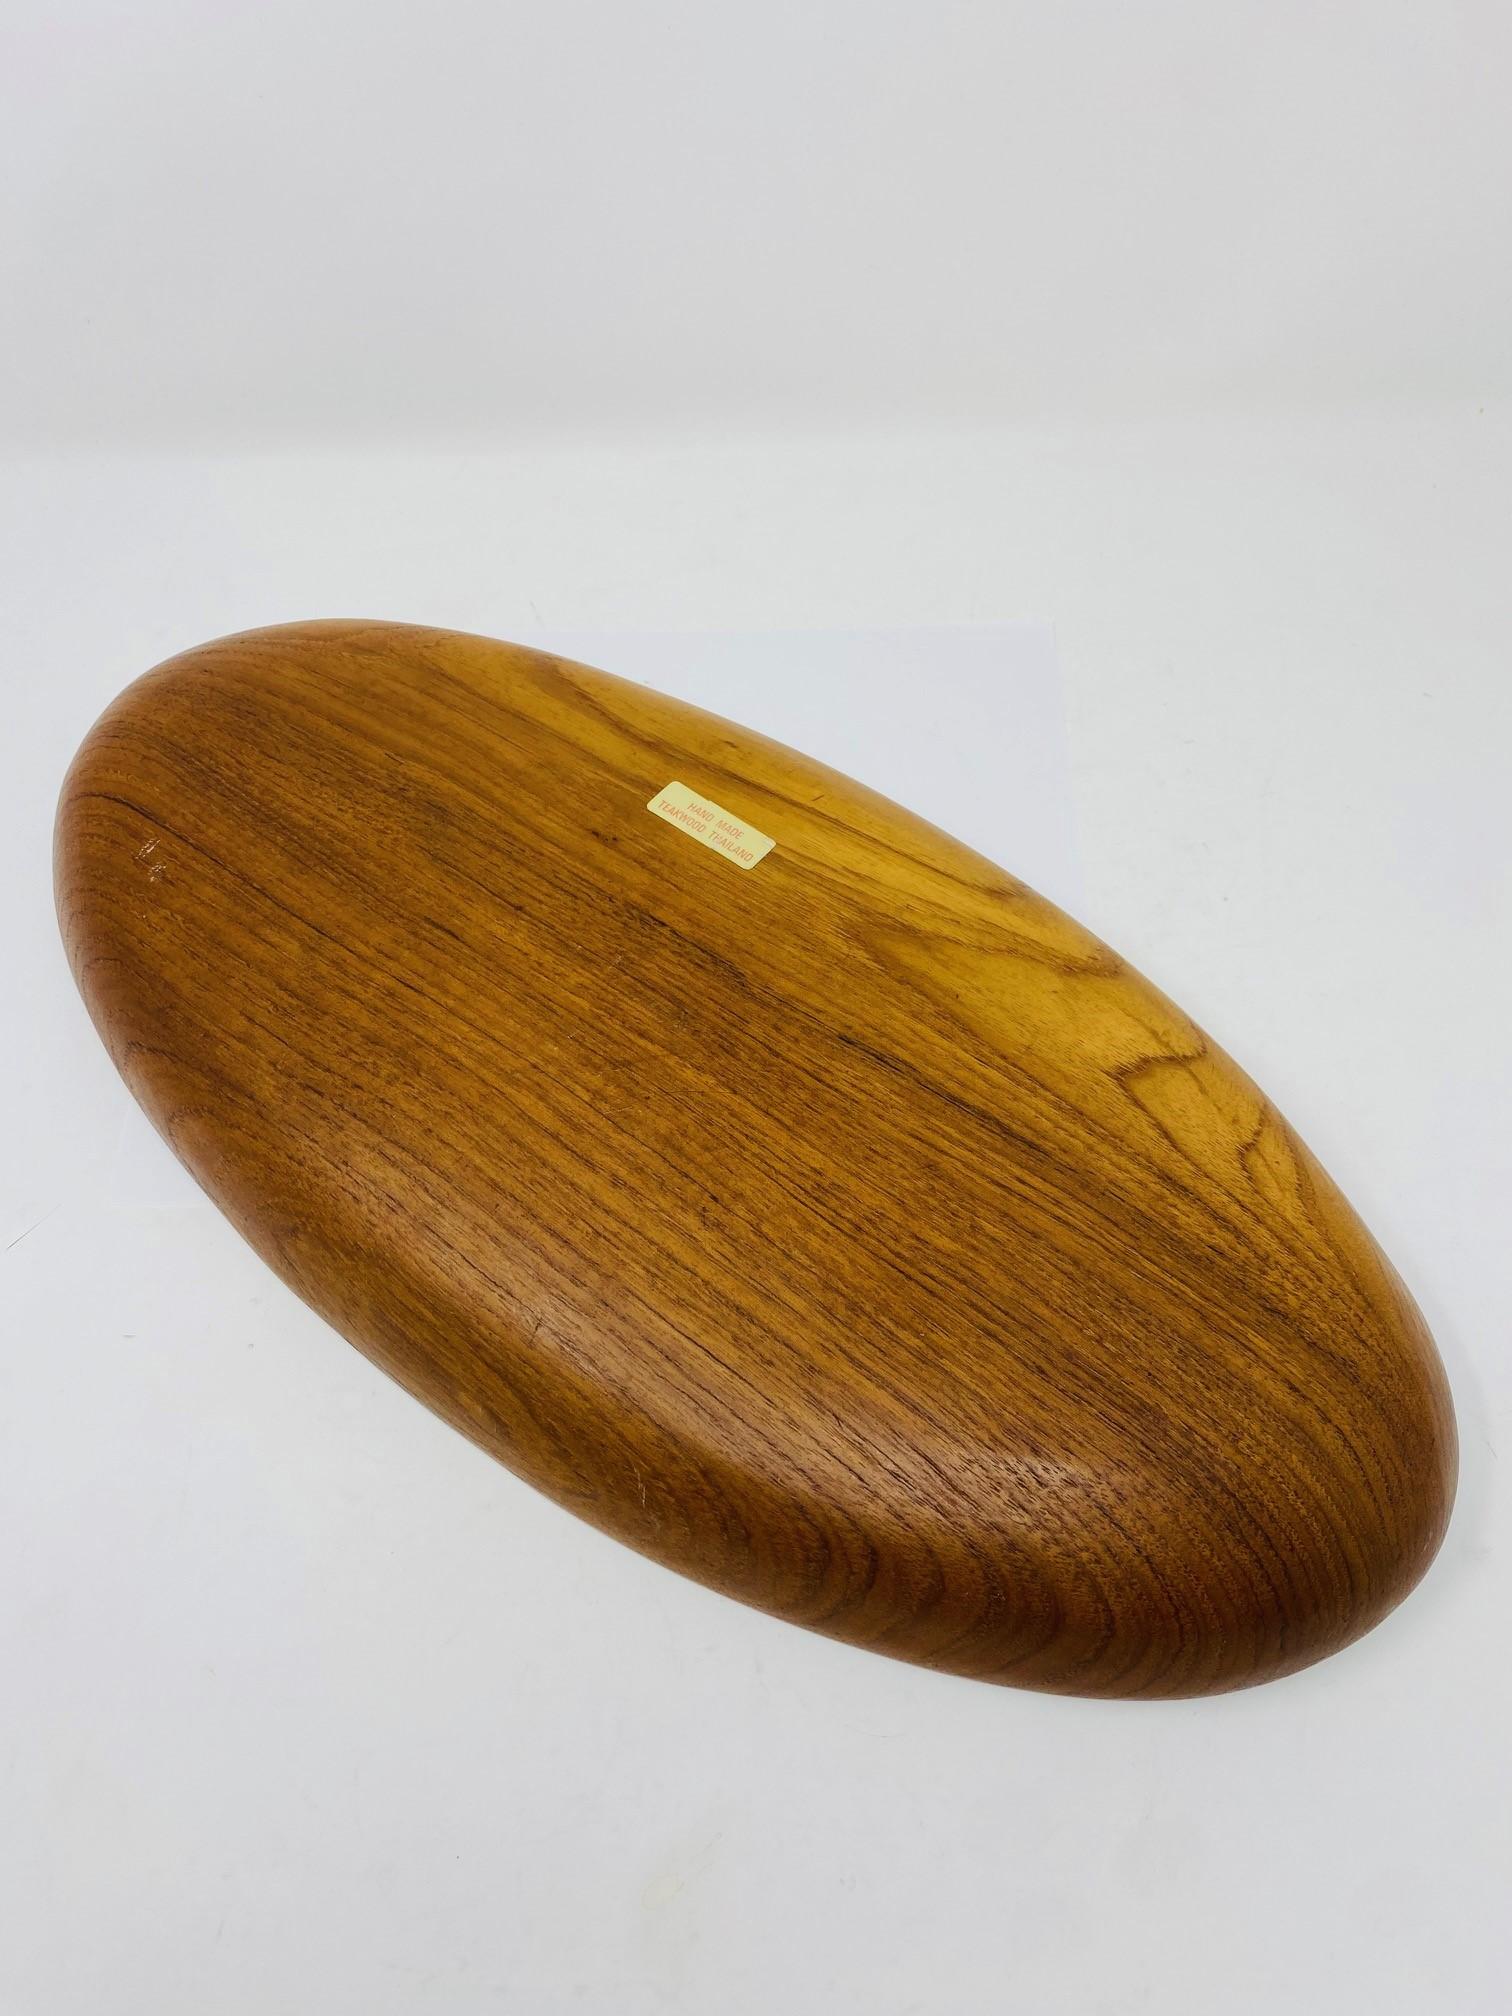 Hand-Crafted Vintage Mid Century Teak Oval Bowl/Tray from Laur Jensen 1960s